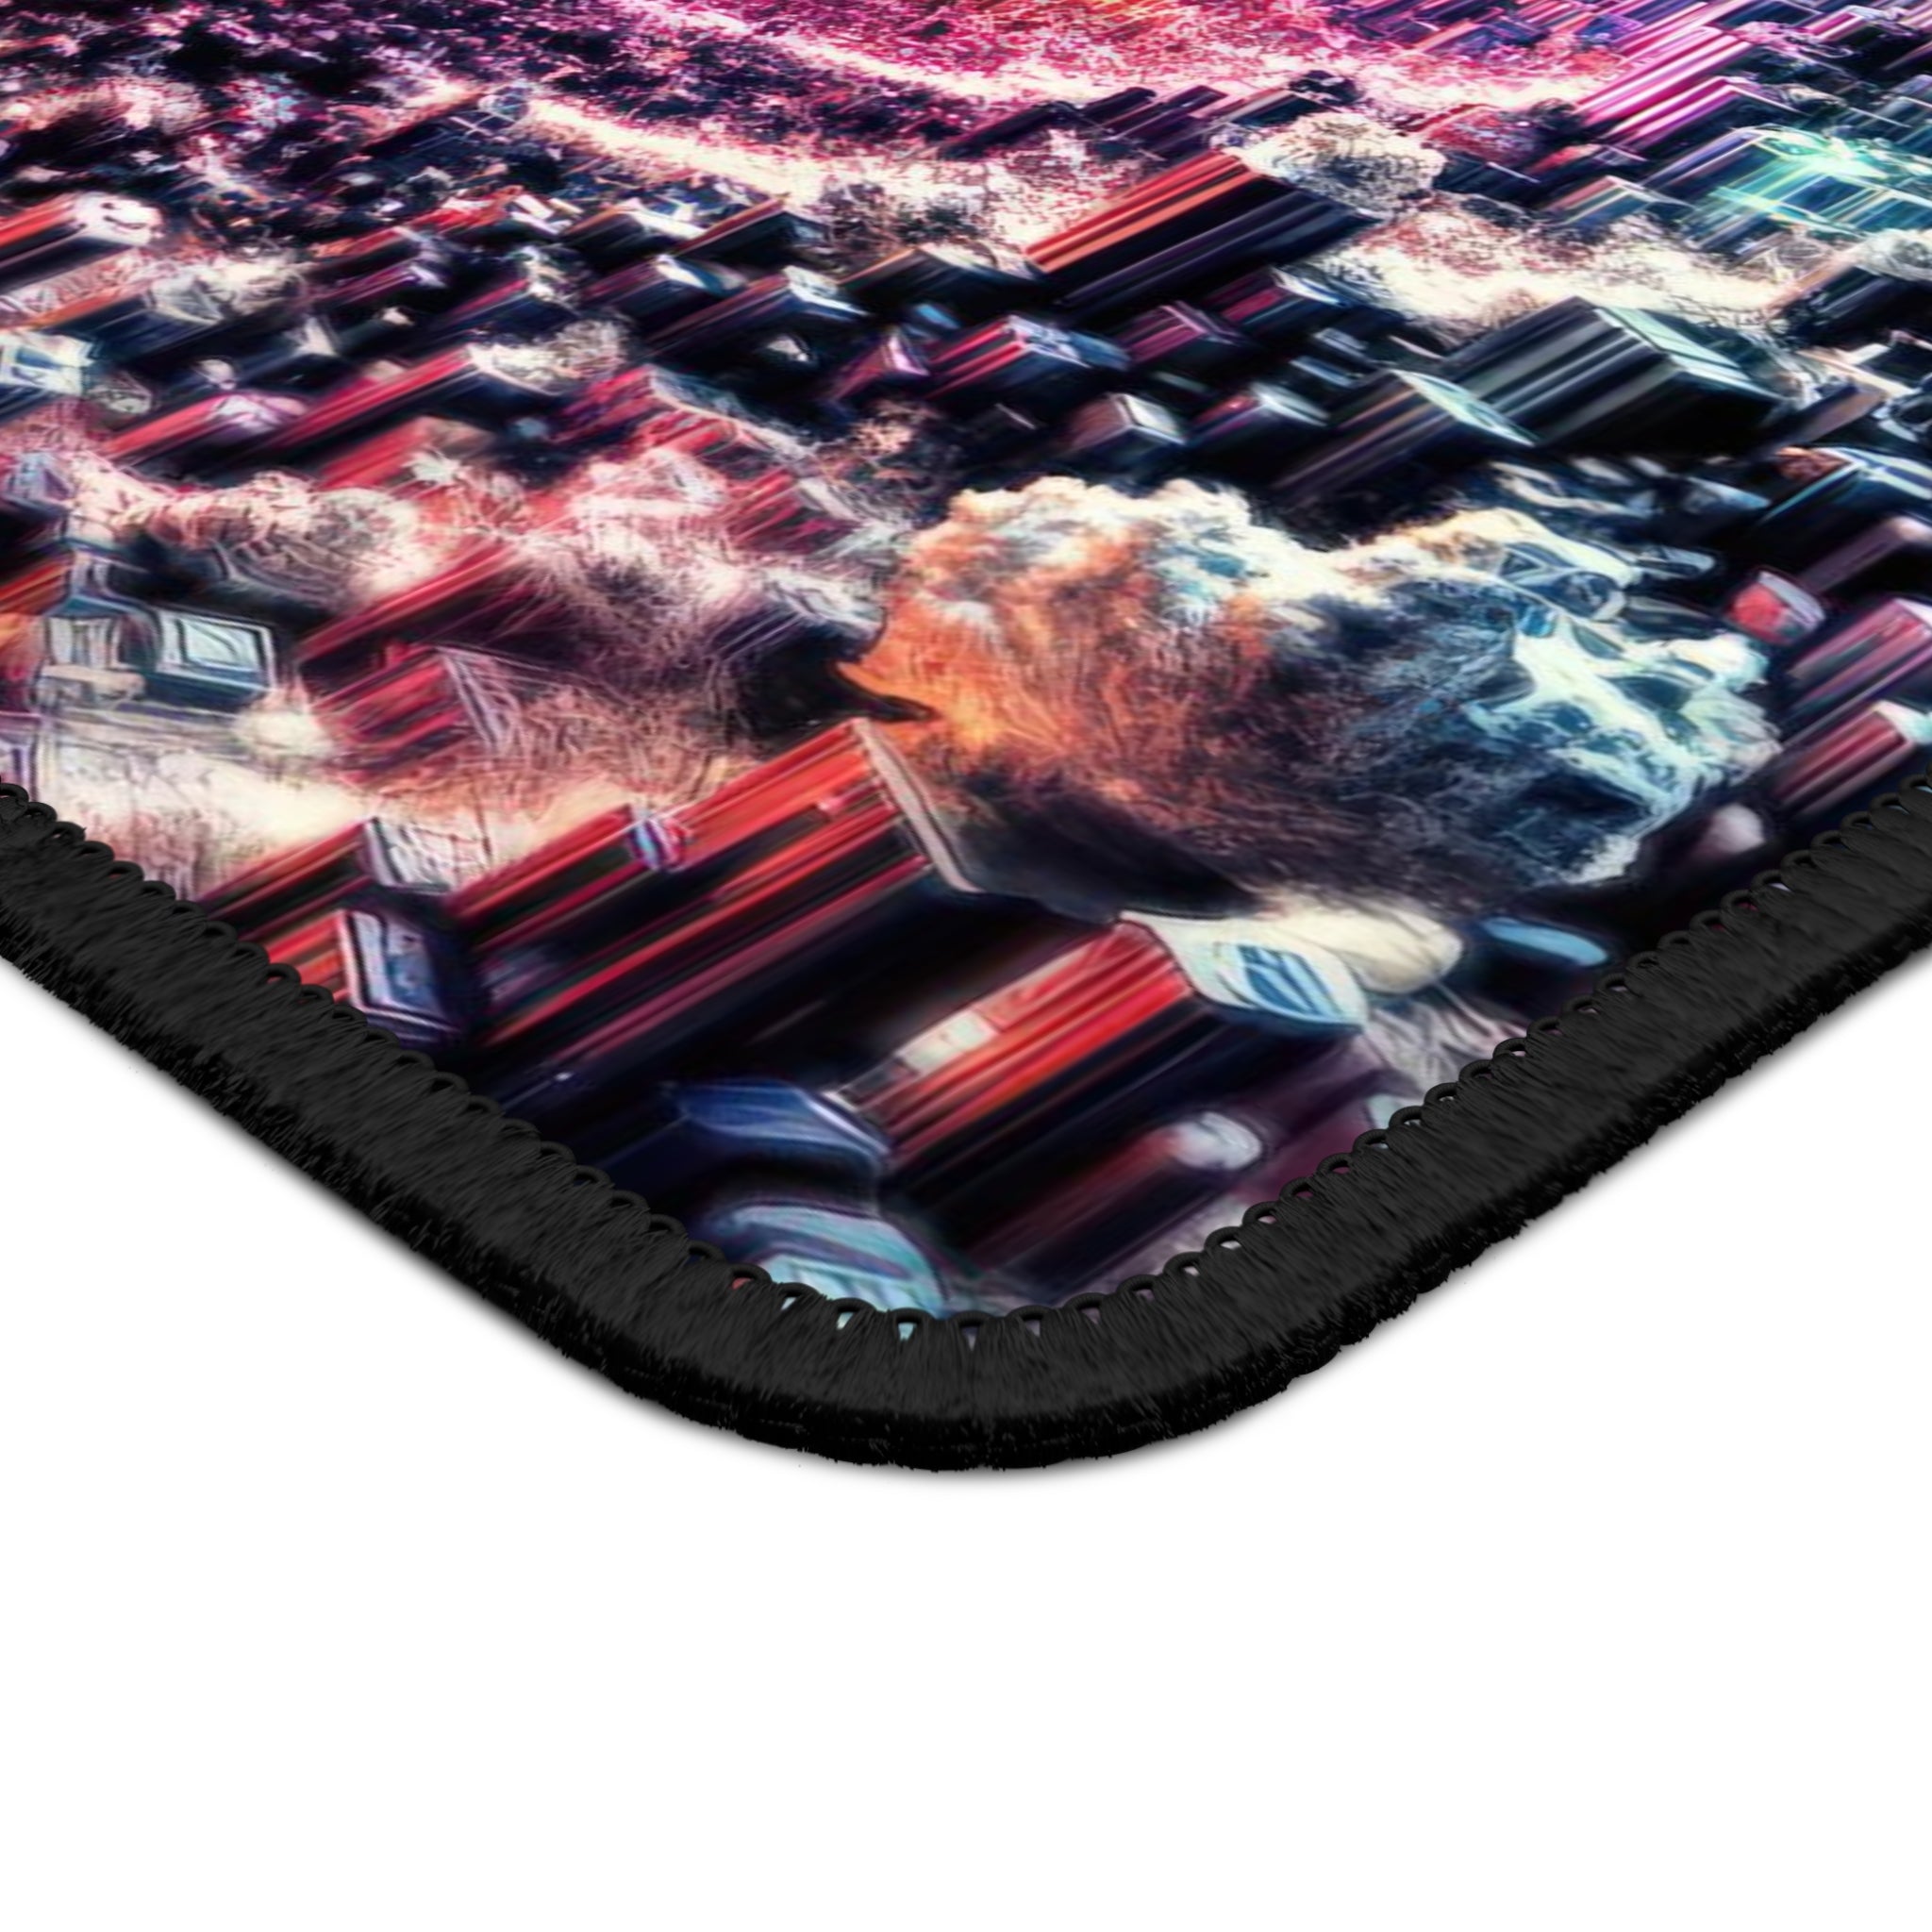 Convergence of Cosmic Symphonies Gaming Mouse Pad